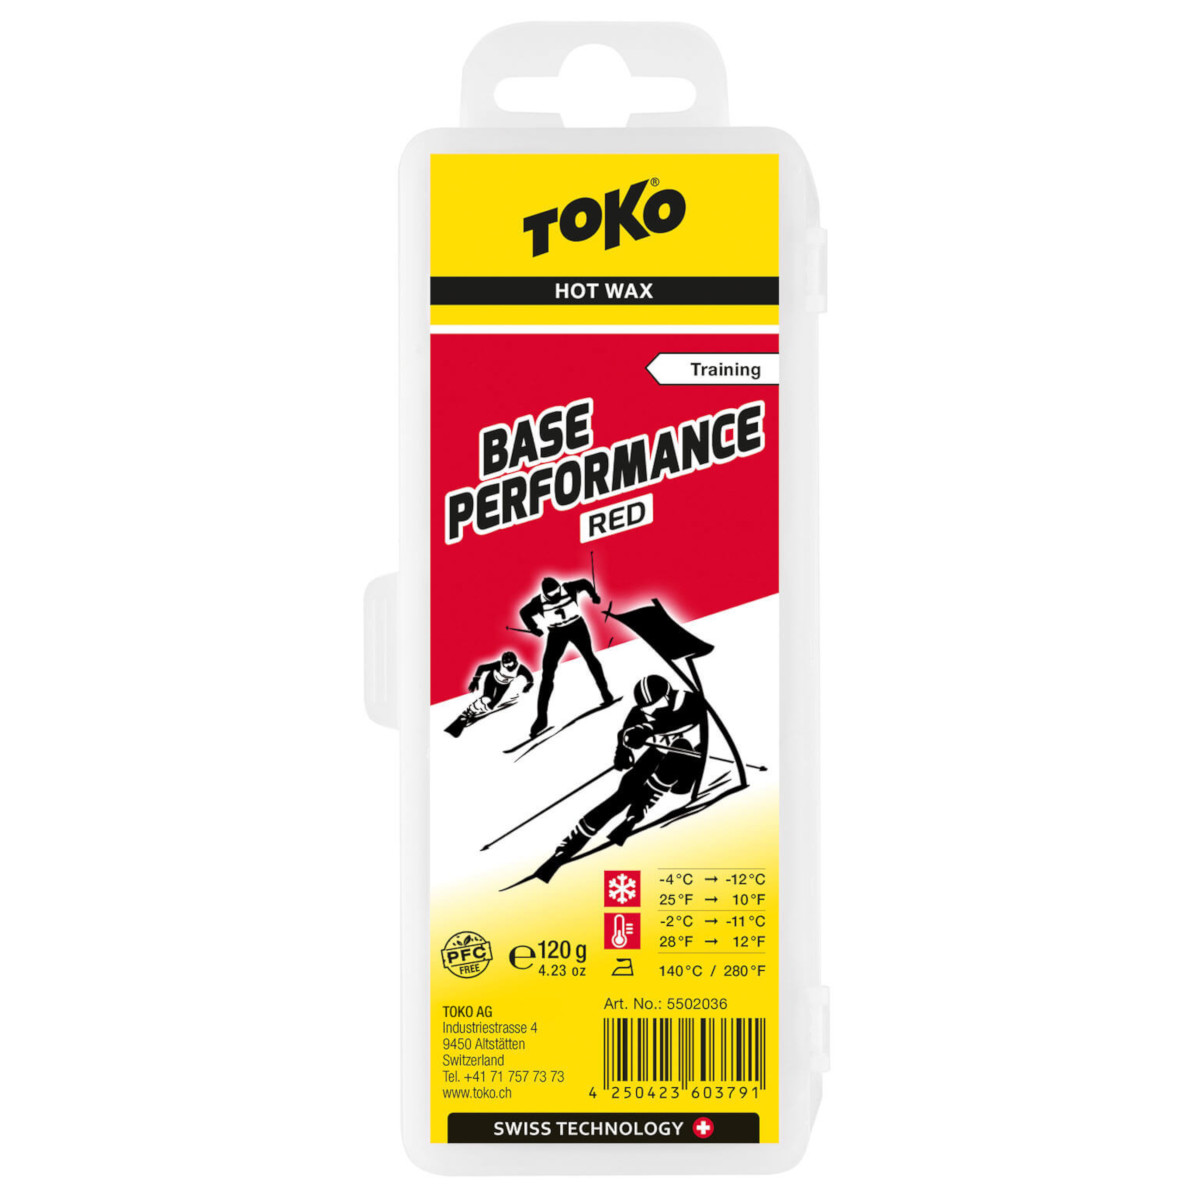 Base Performance Hot Wax red